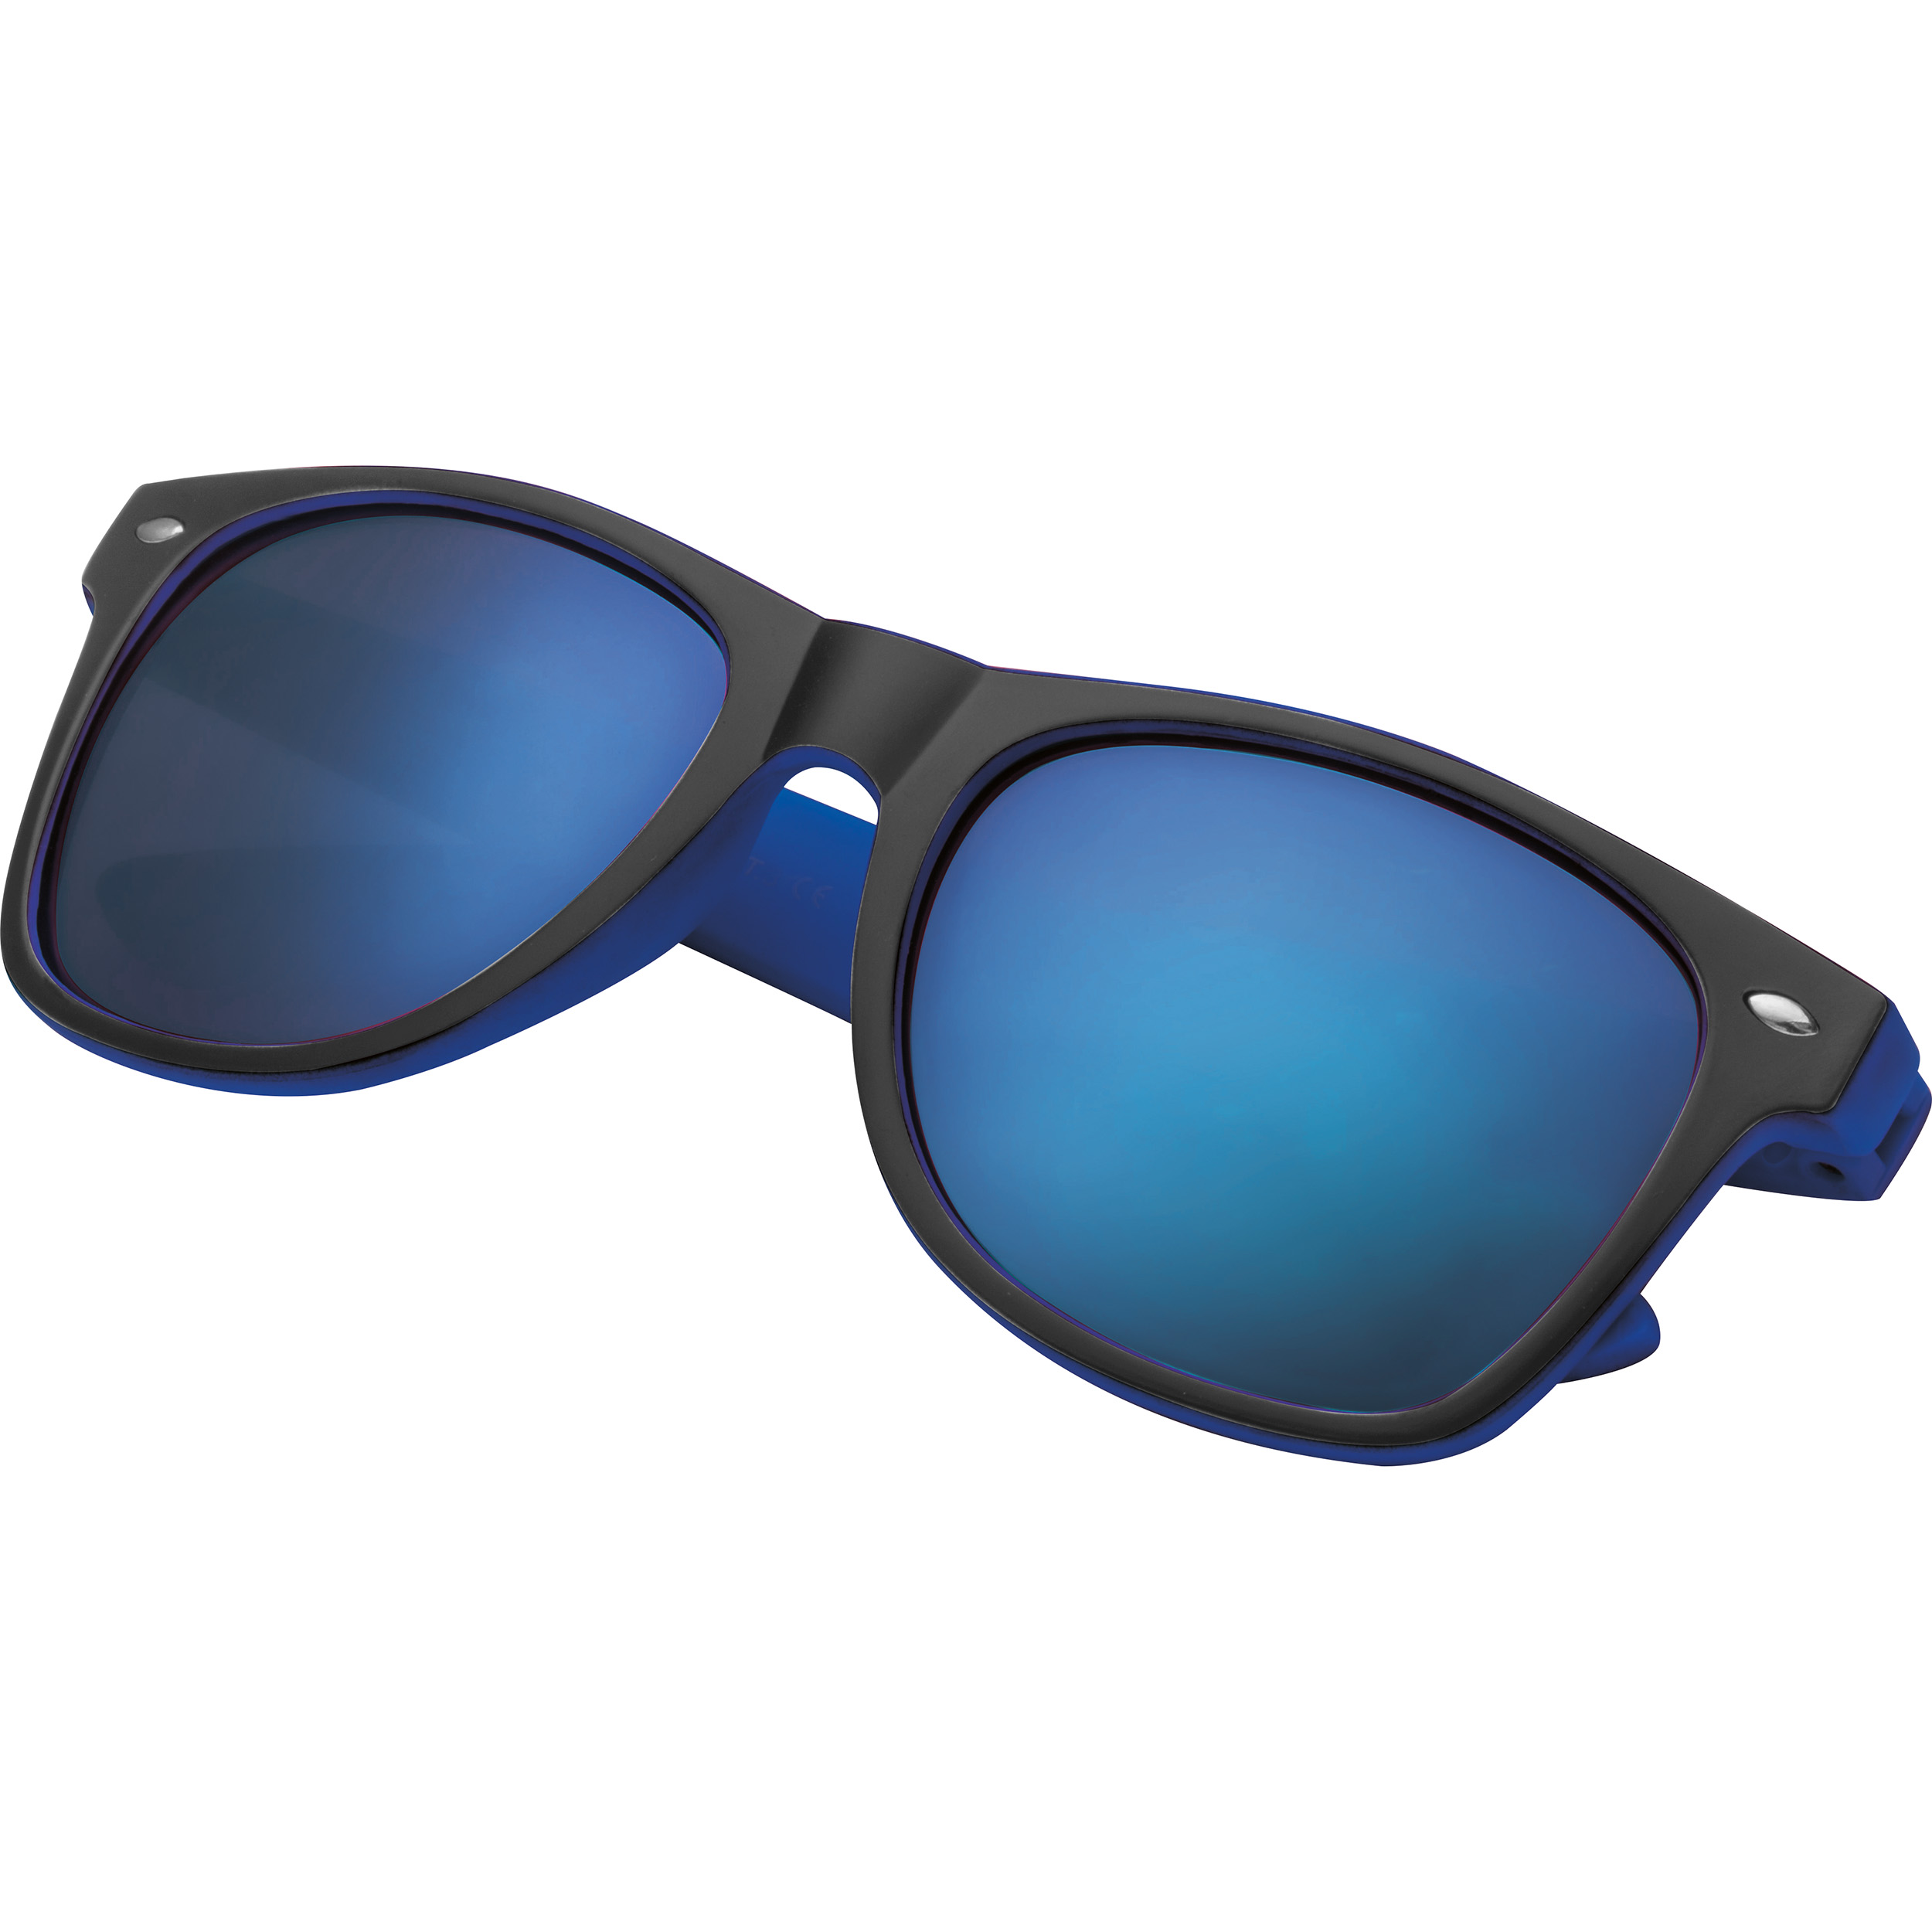 Sunglasses with Logo Print - Stow-on-the-Wold - Ullapool